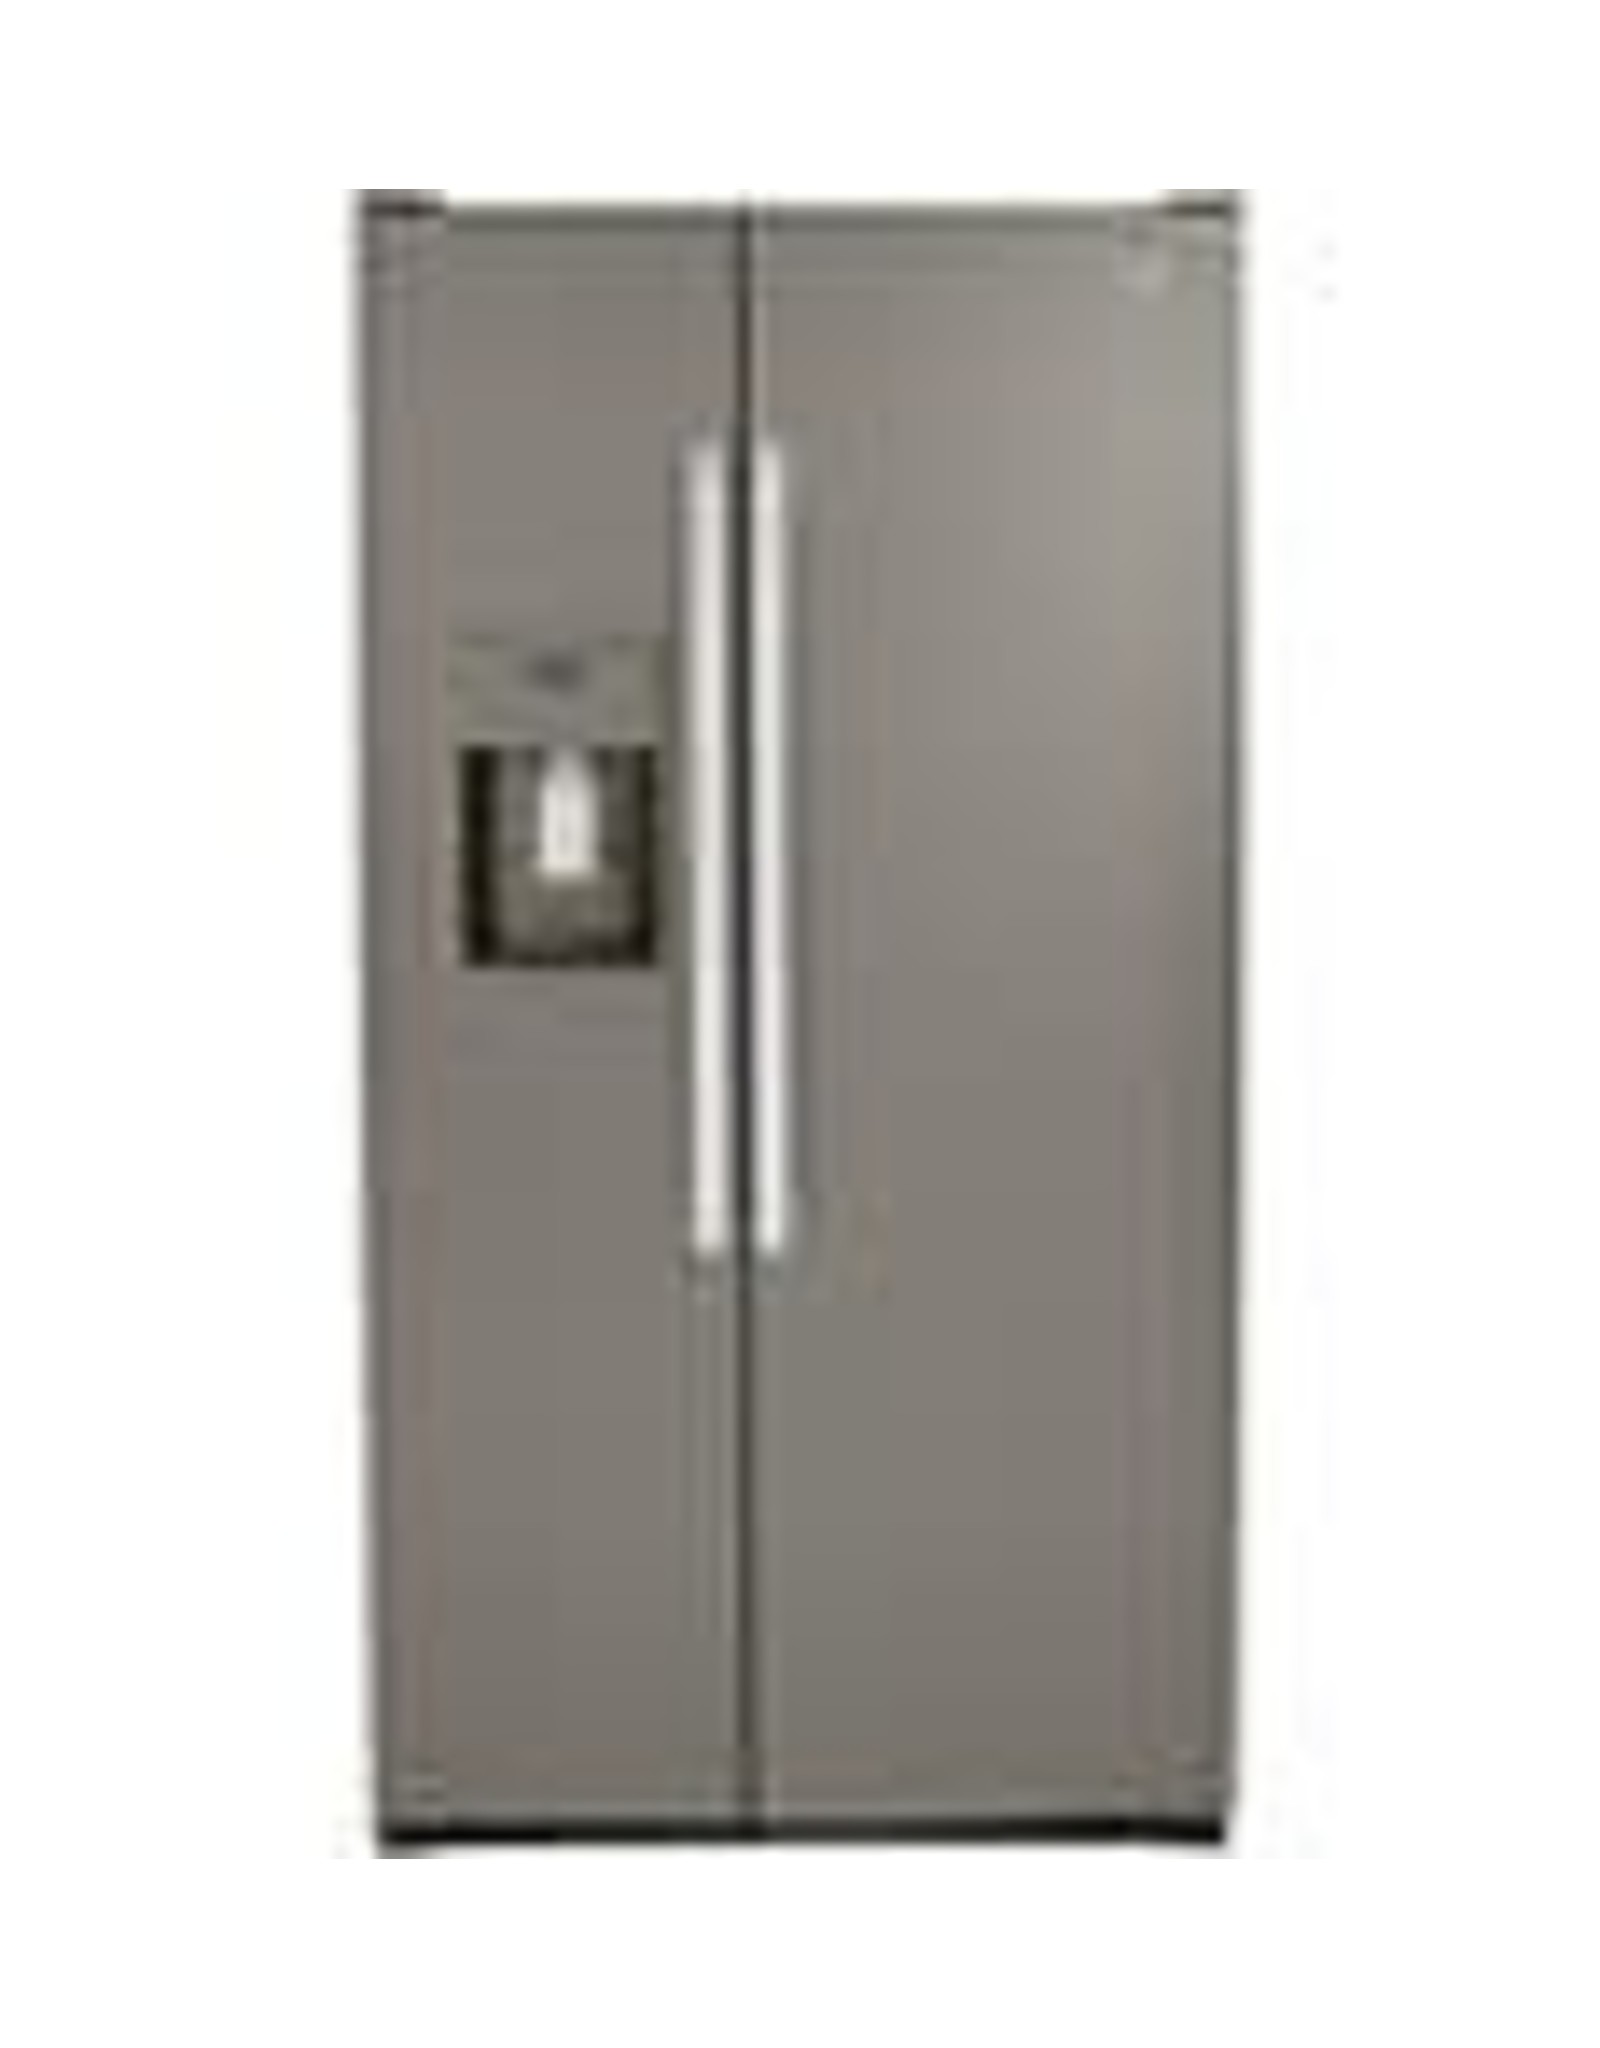 PSS28KSHKCSS GE  25.3-cu ft Side-by-Side Refrigerator with Ice Maker (Stainless Steel)